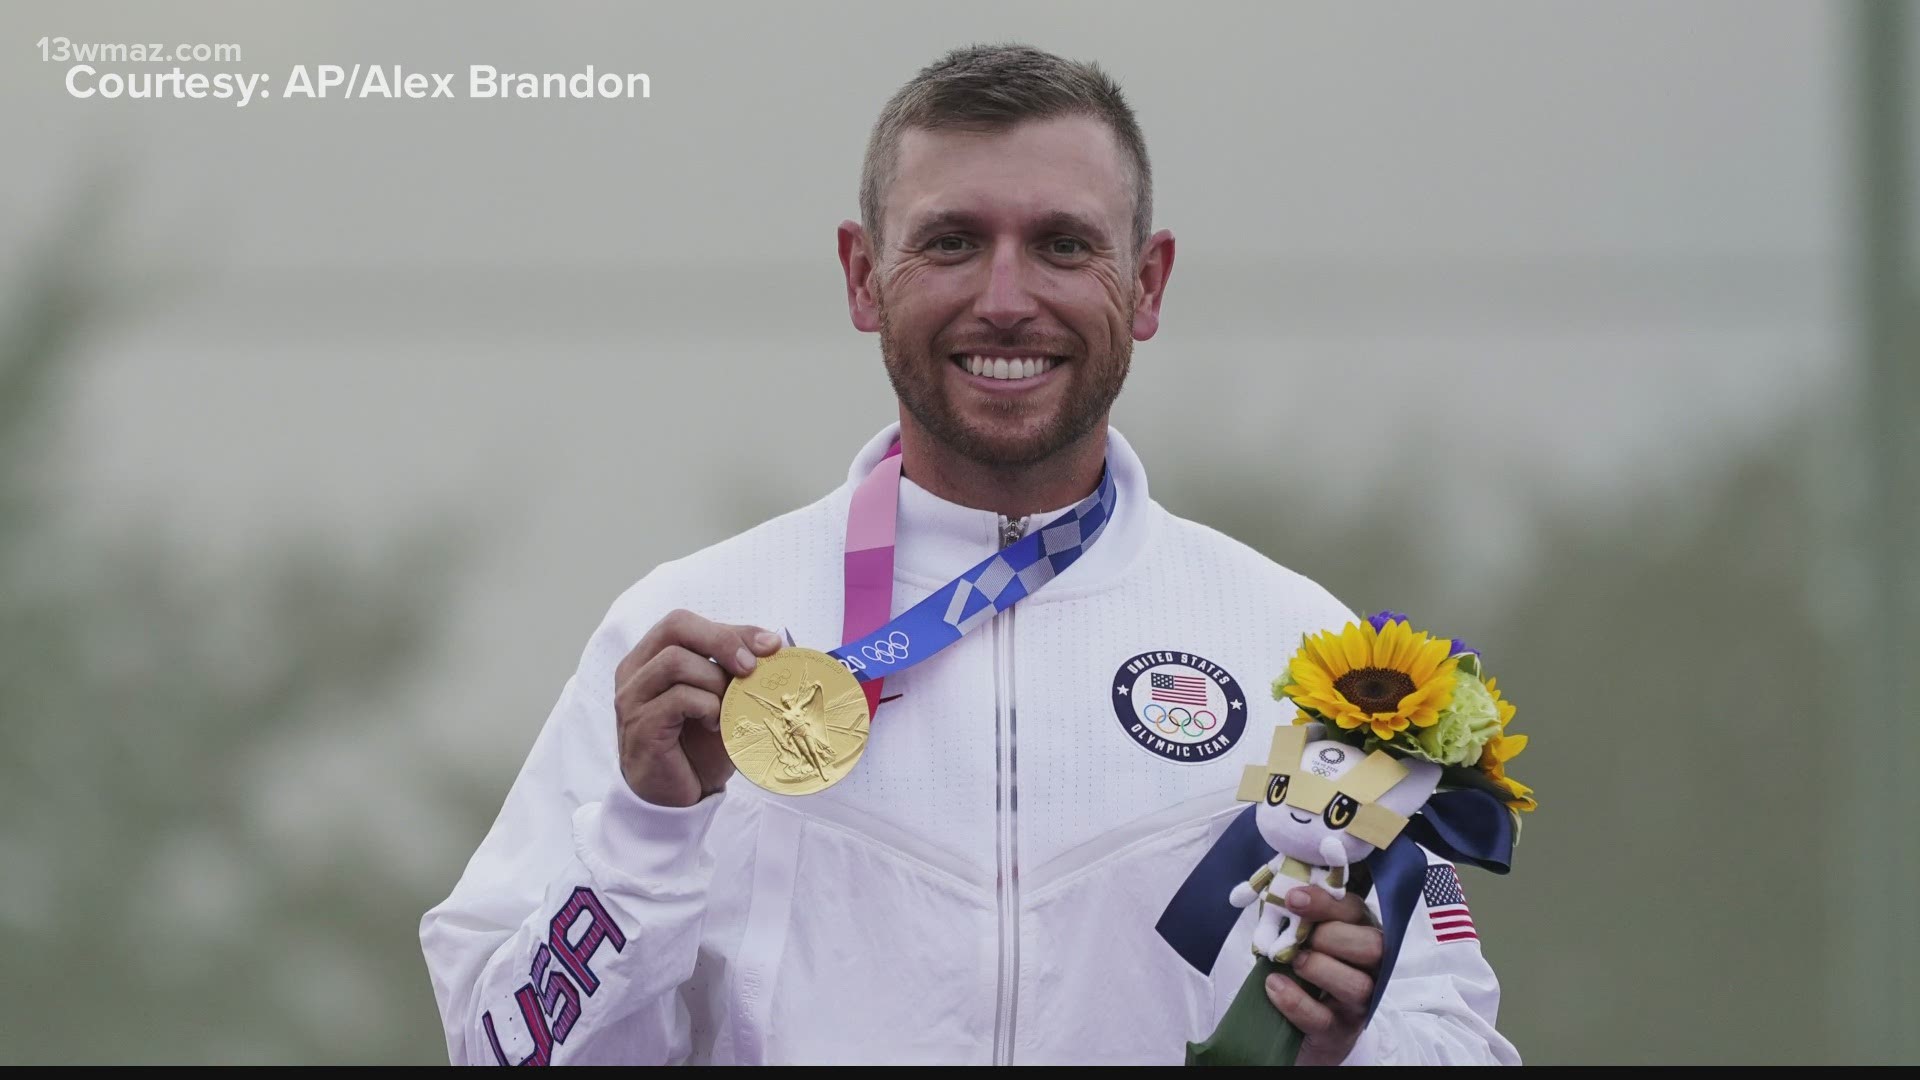 Hancock is the first skeet shooter to win three golds and set an Olympic record by hitting 59 of 60 targets